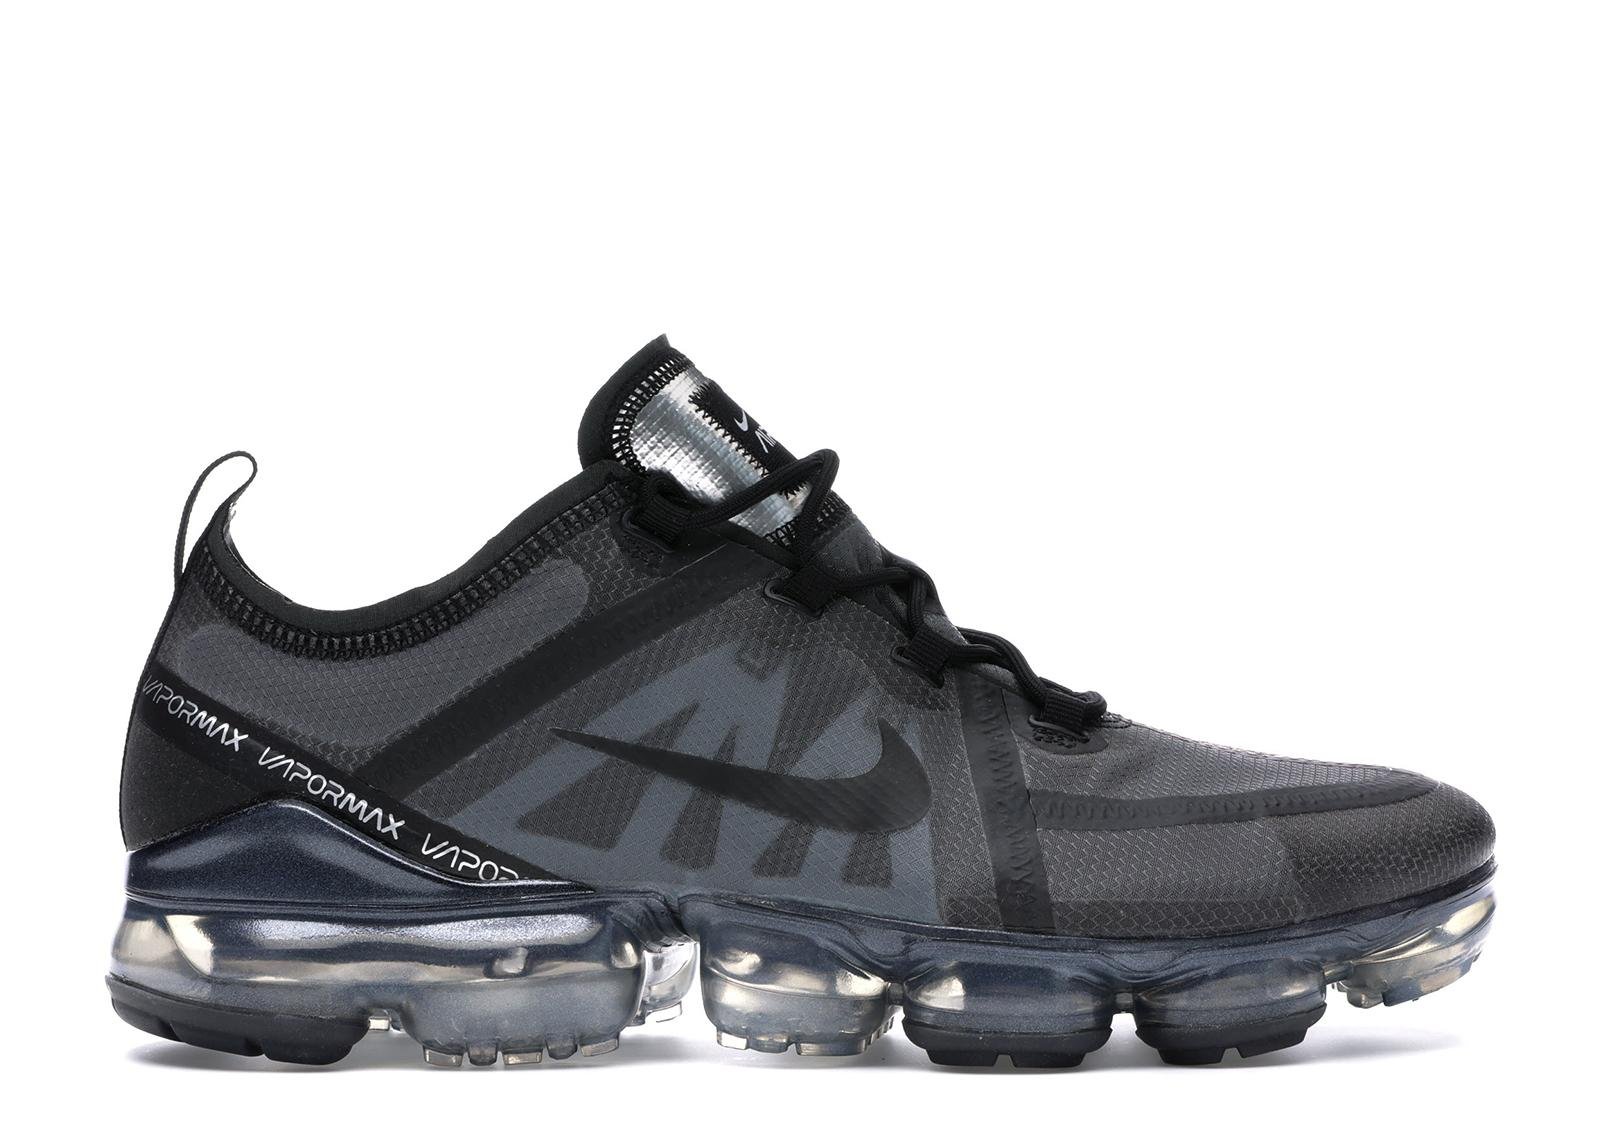 Nike Air Vapormax 2019 - Trainers in 